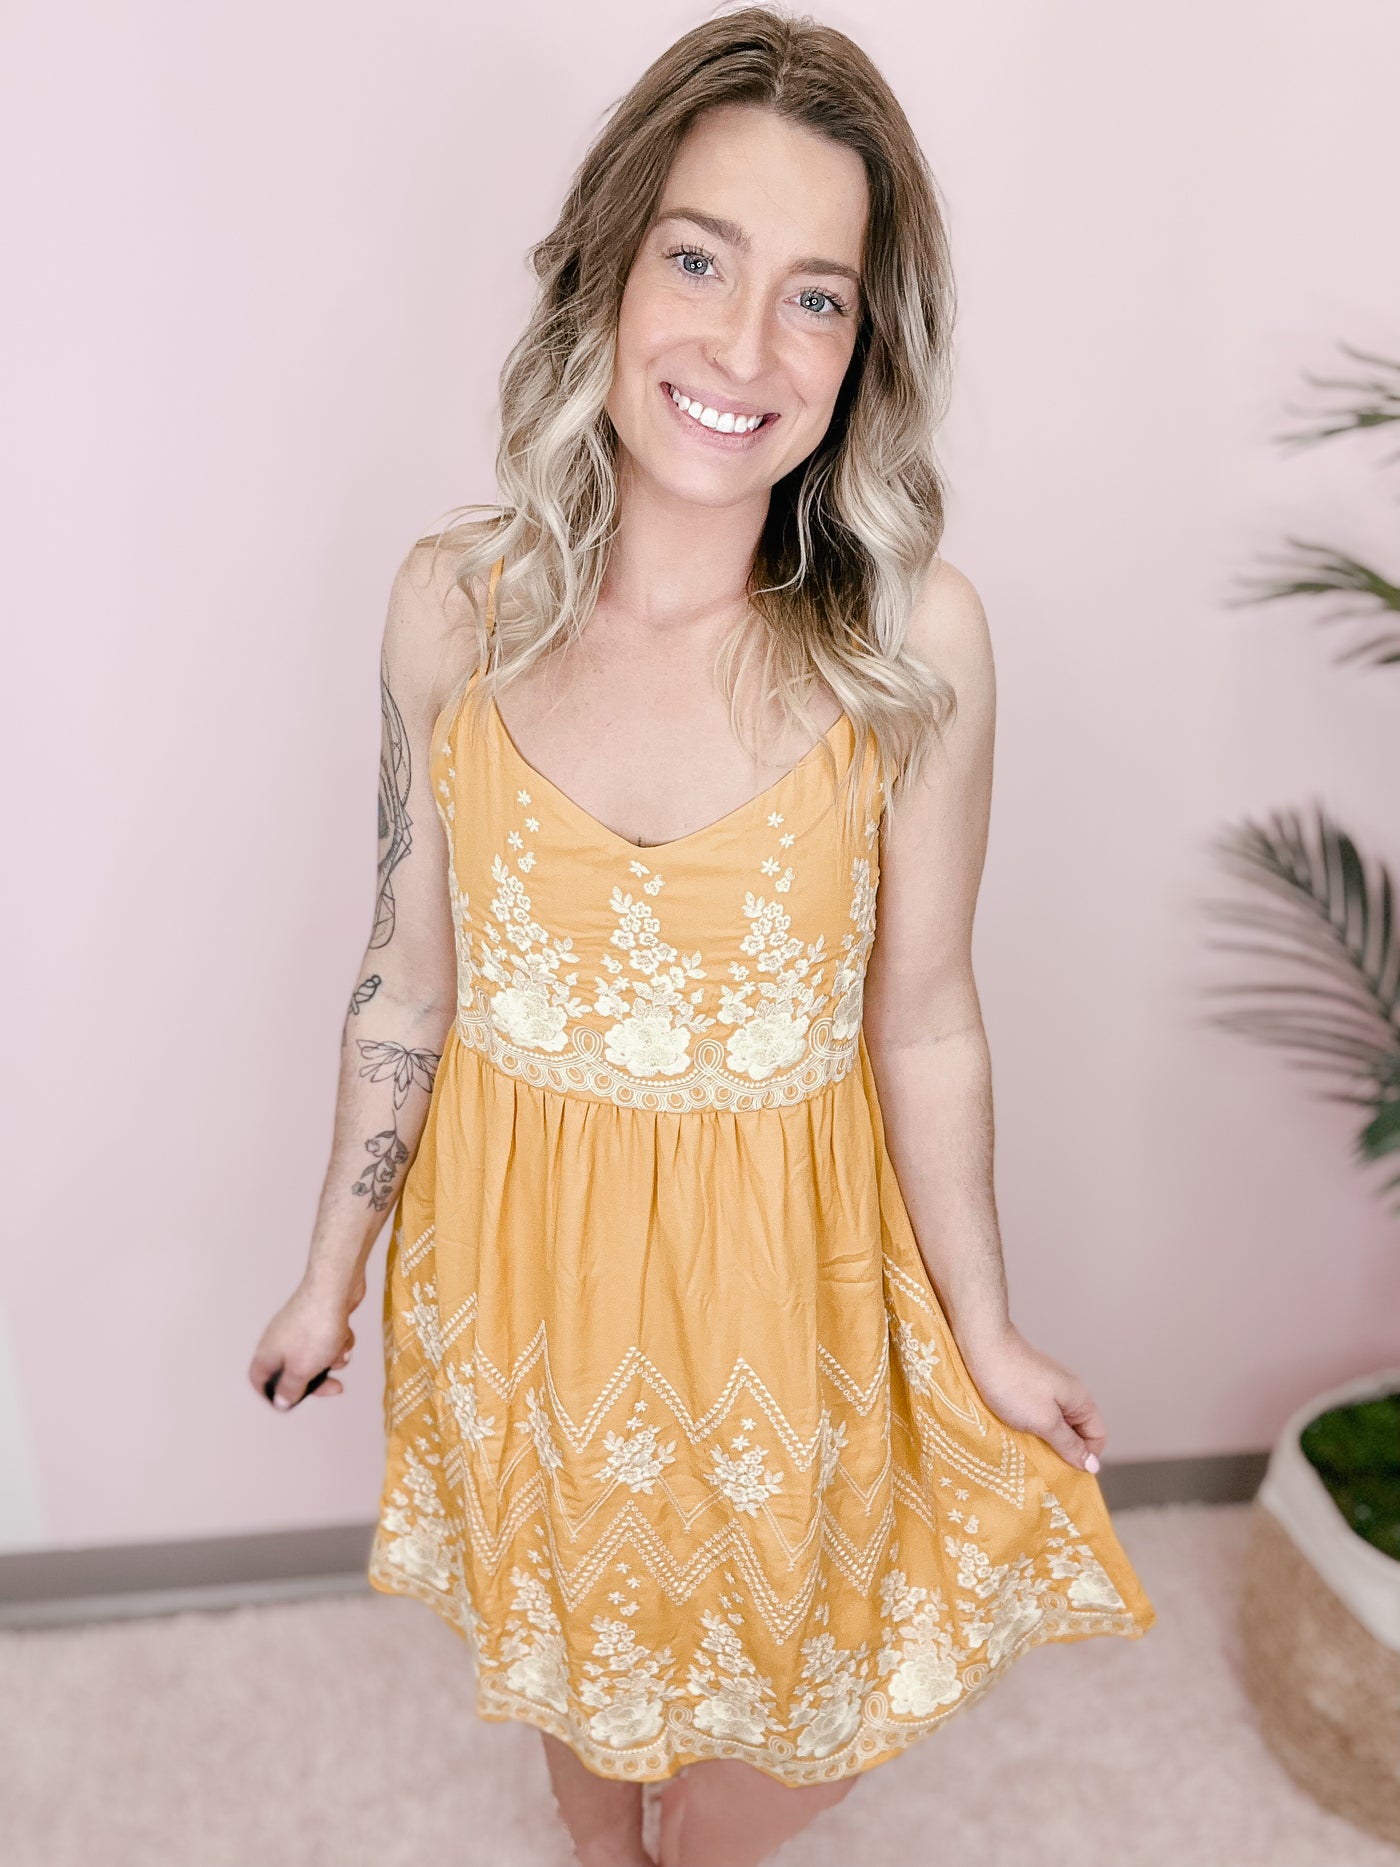 The Floral Forest Dress